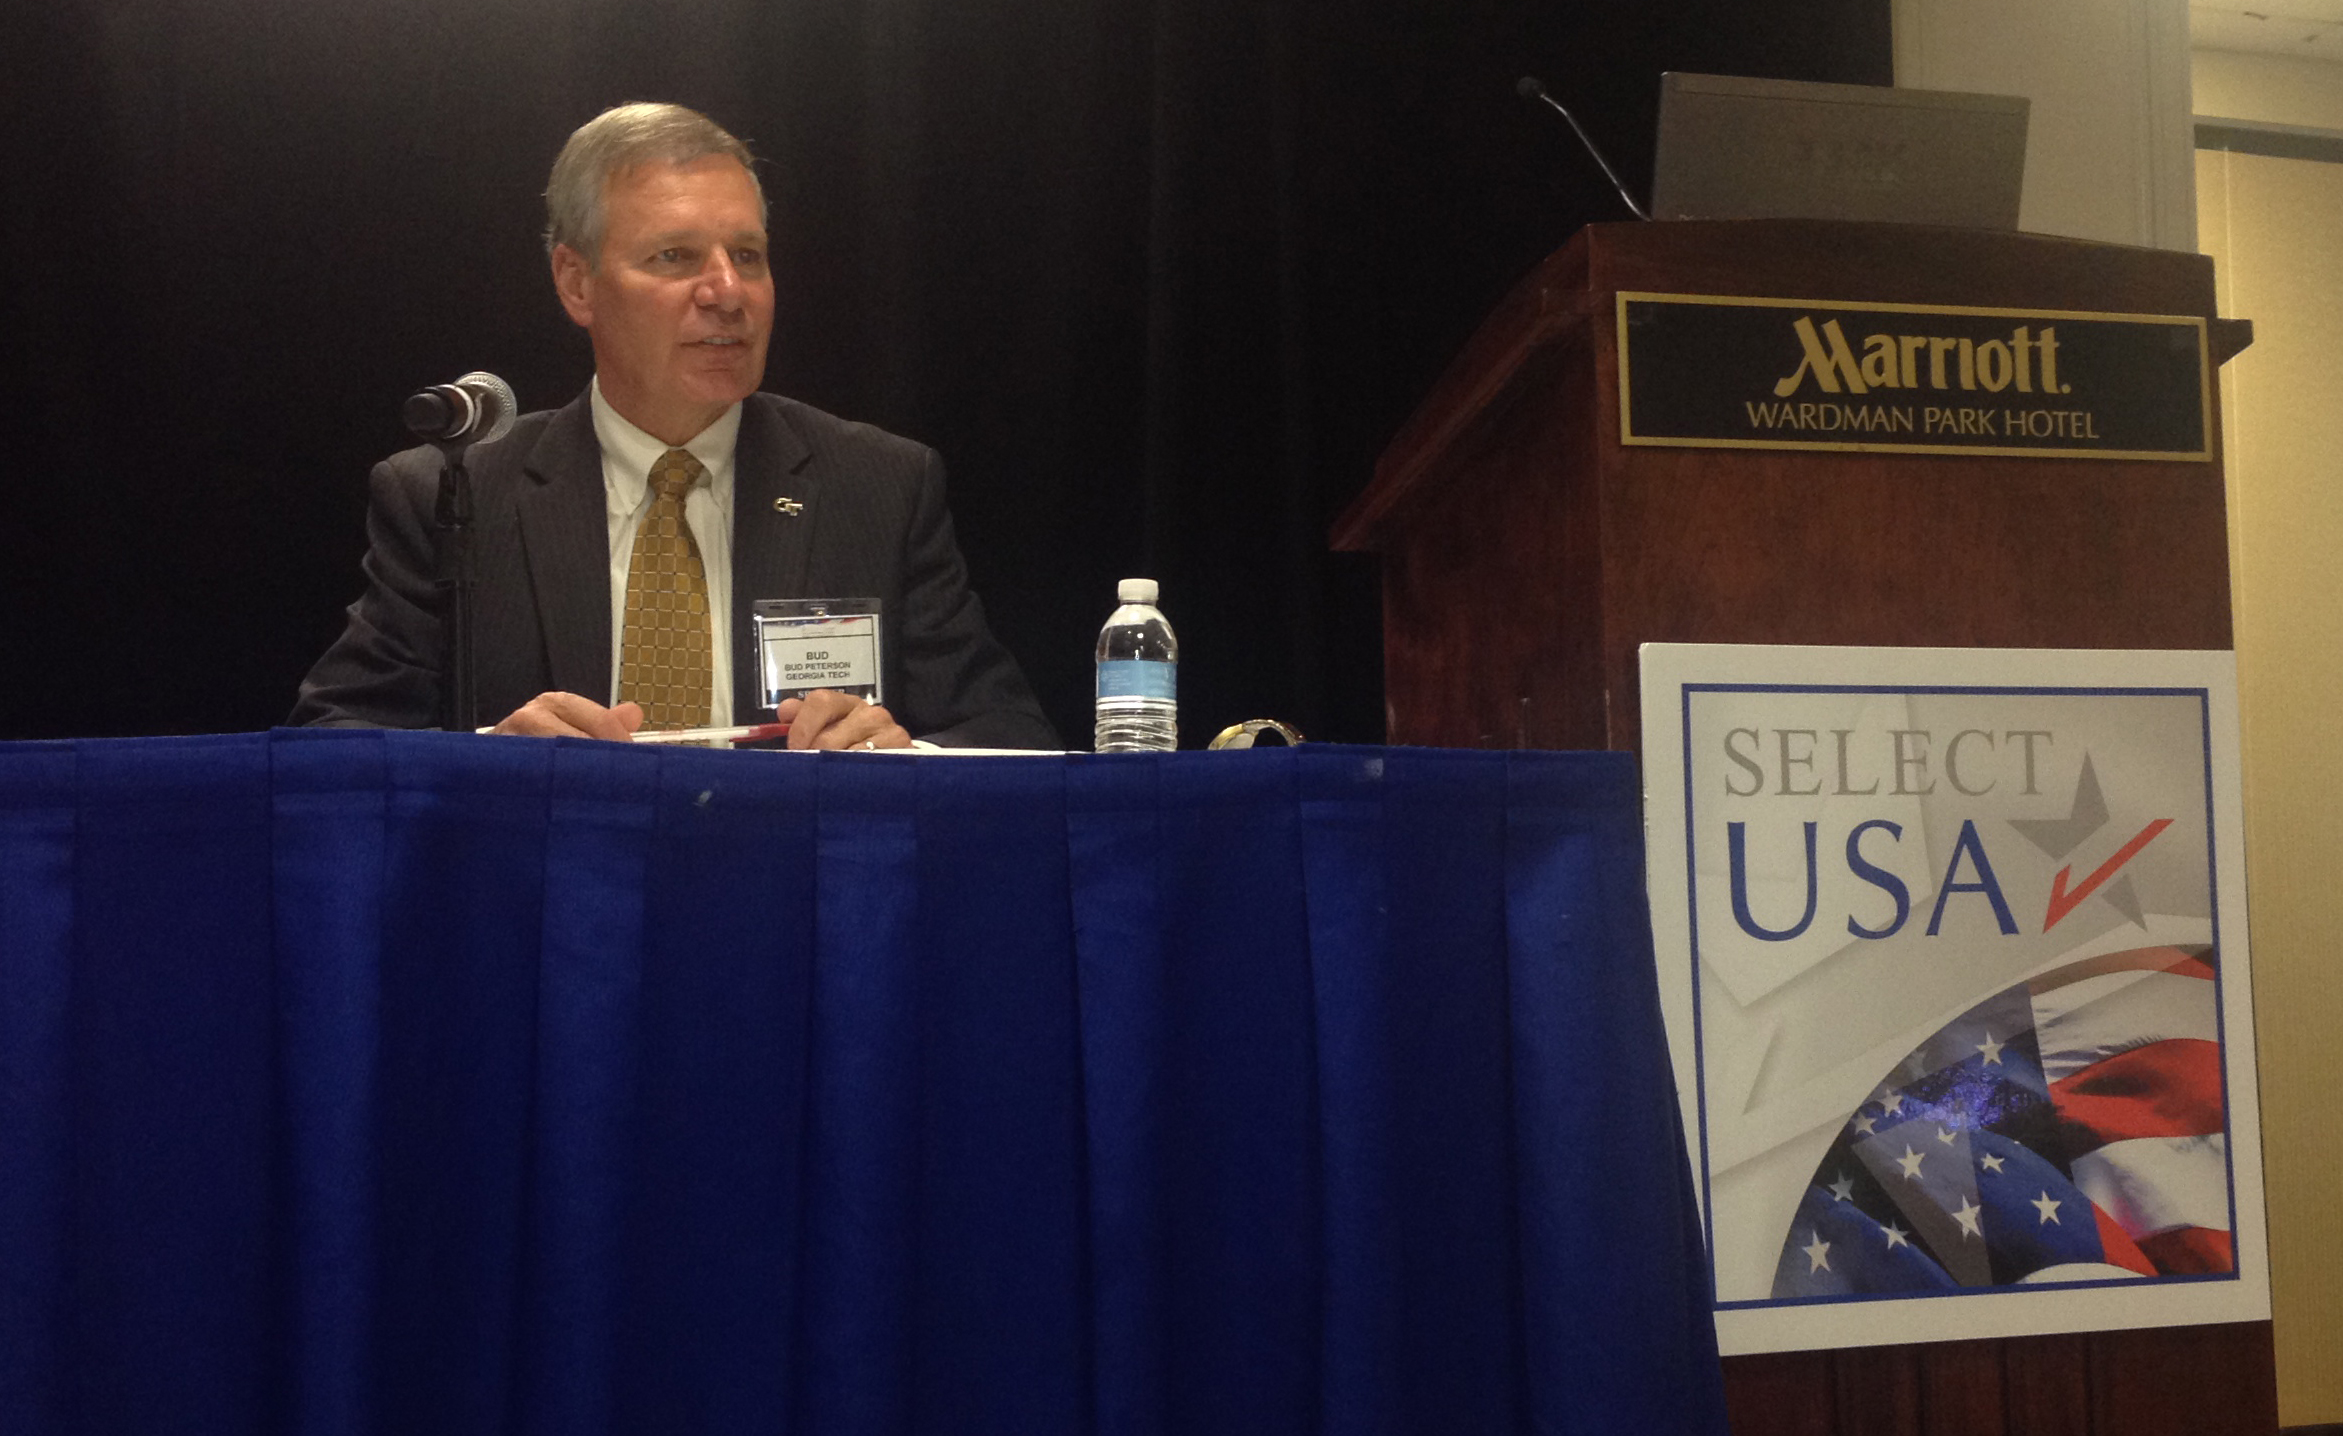 Georgia Tech President G.P. "Bud" Peterson moderates a panel at the Select USA Investment Summit in Washington DC on October 31, 2013.